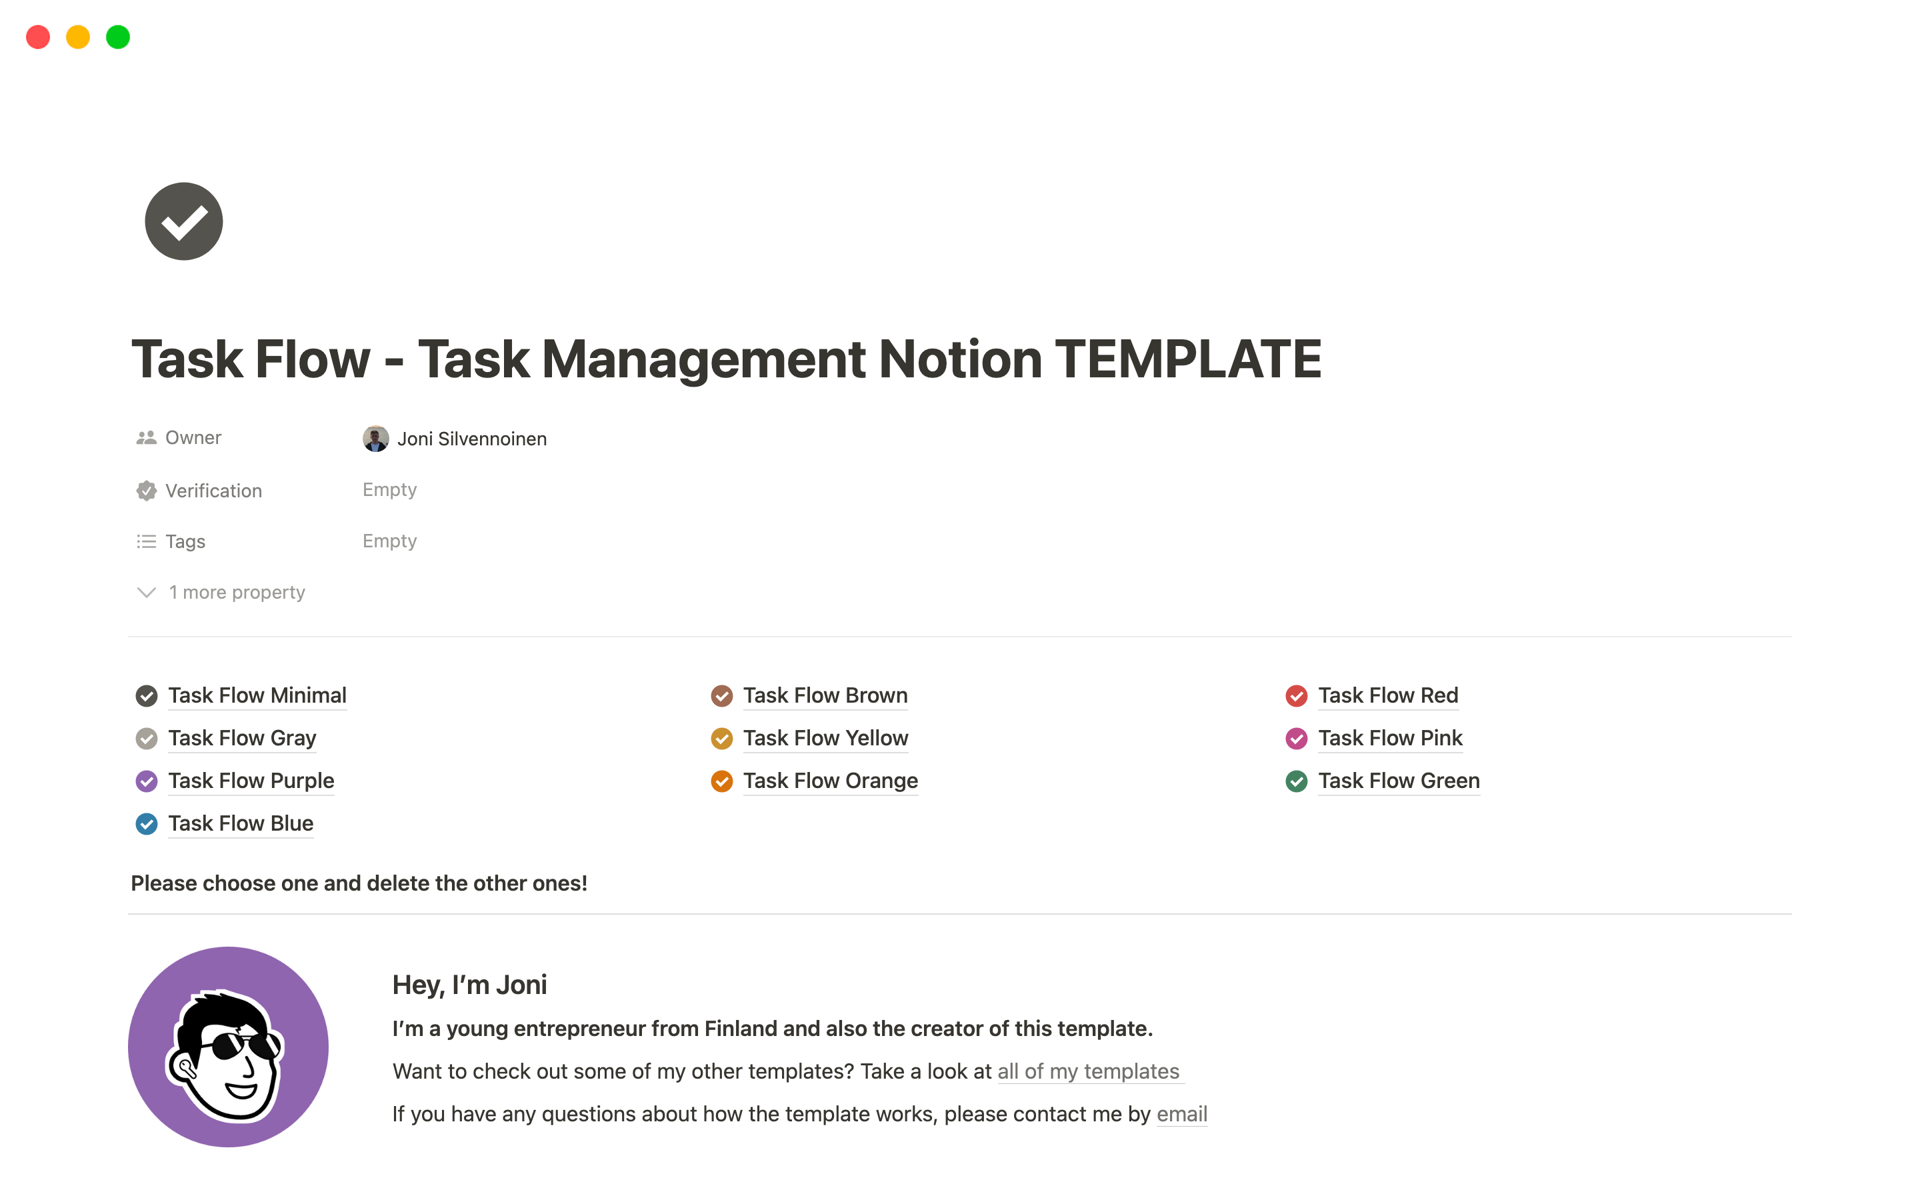 The Task Flow template is a comprehensive task management system that helps individuals and teams set and achieve their goals by breaking them down into projects and actionable tasks.